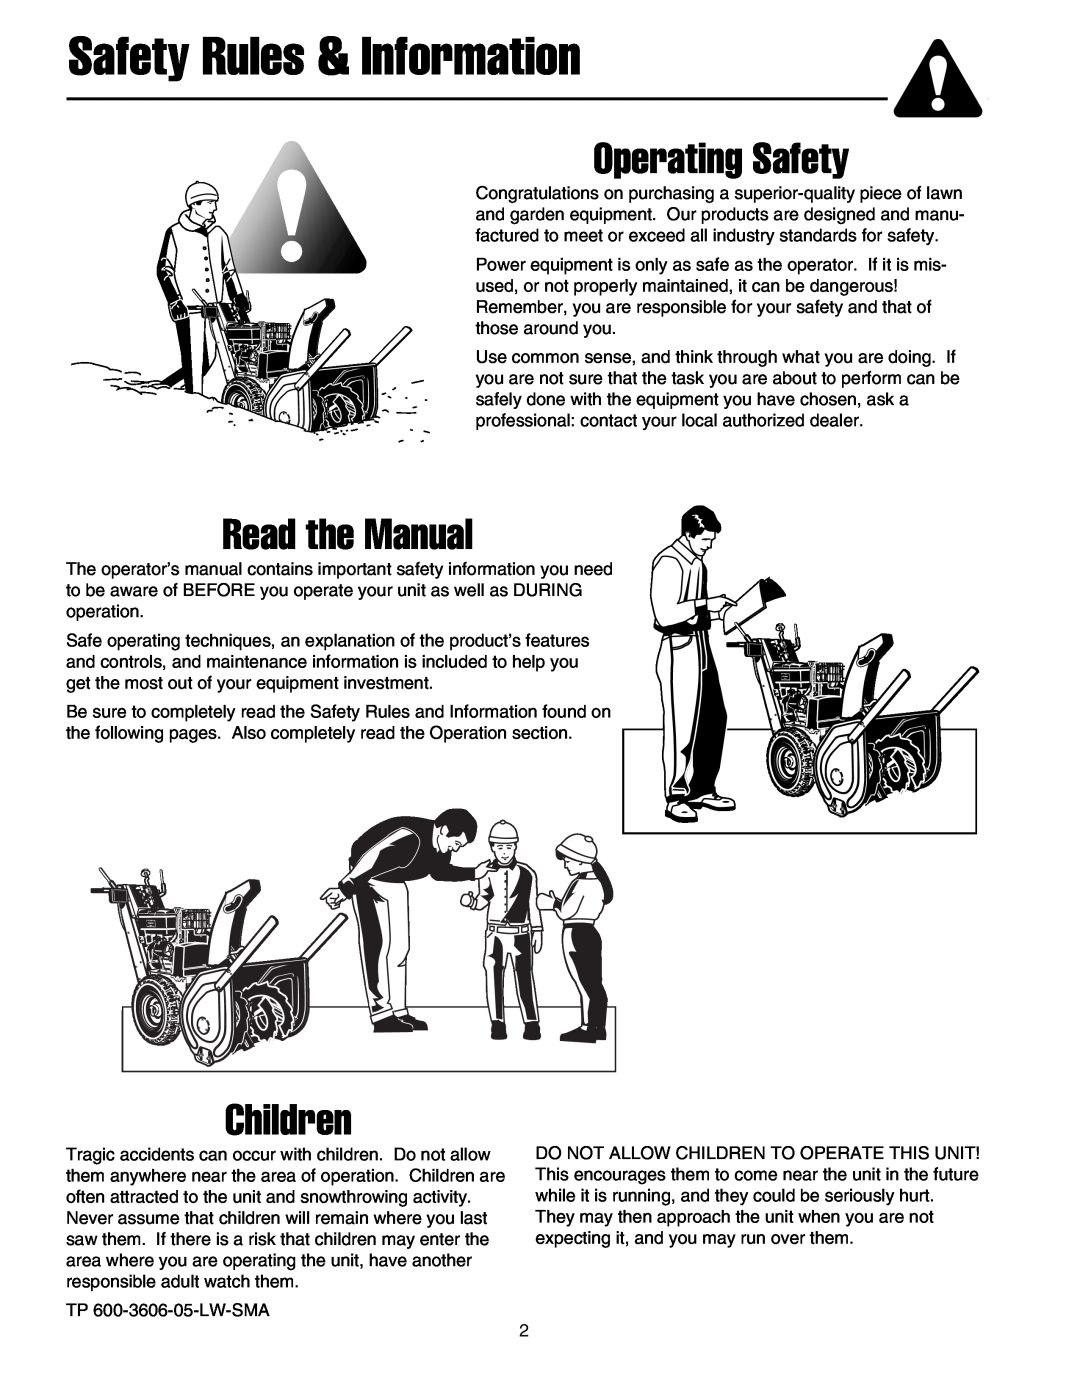 Briggs & Stratton 1738, 1732, 1628, 1524 manual Safety Rules & Information, Operating Safety, Read the Manual, Children 